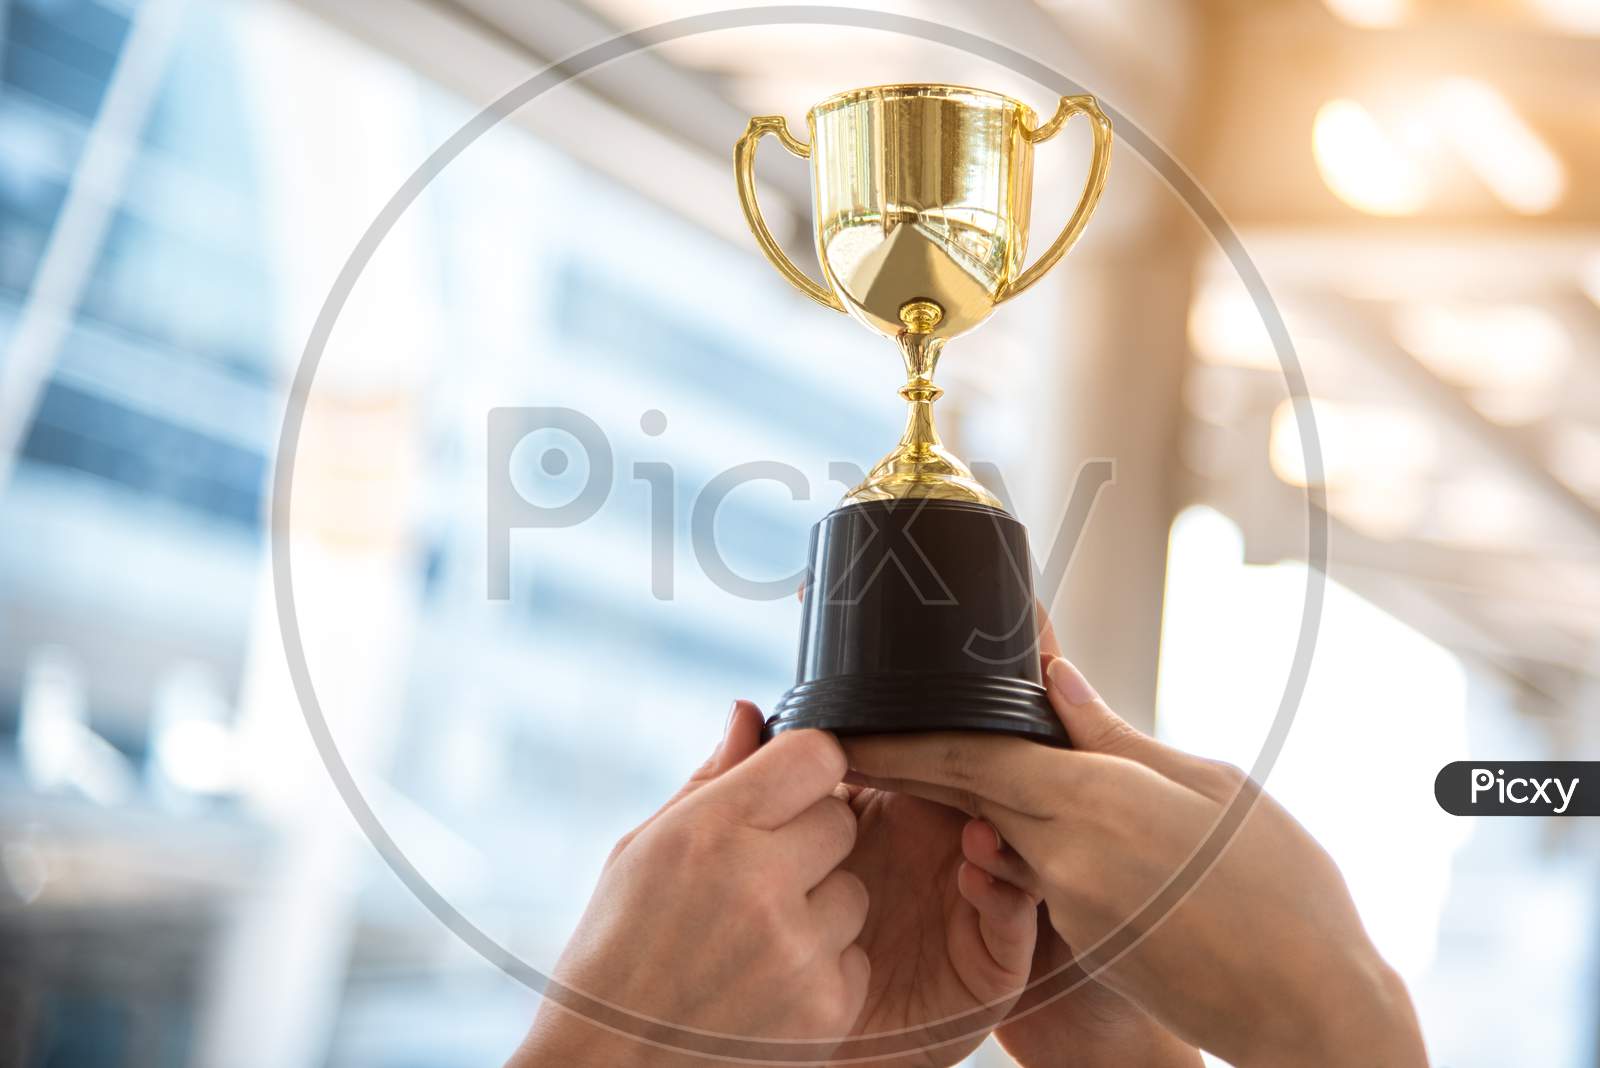 Champion Golden Trophy For Winner With Sport Player Hands In Sport Stadium Background. Success And Achievement Concept. Sport And Cup Award Theme. American Football Award And Match Game Play Prize